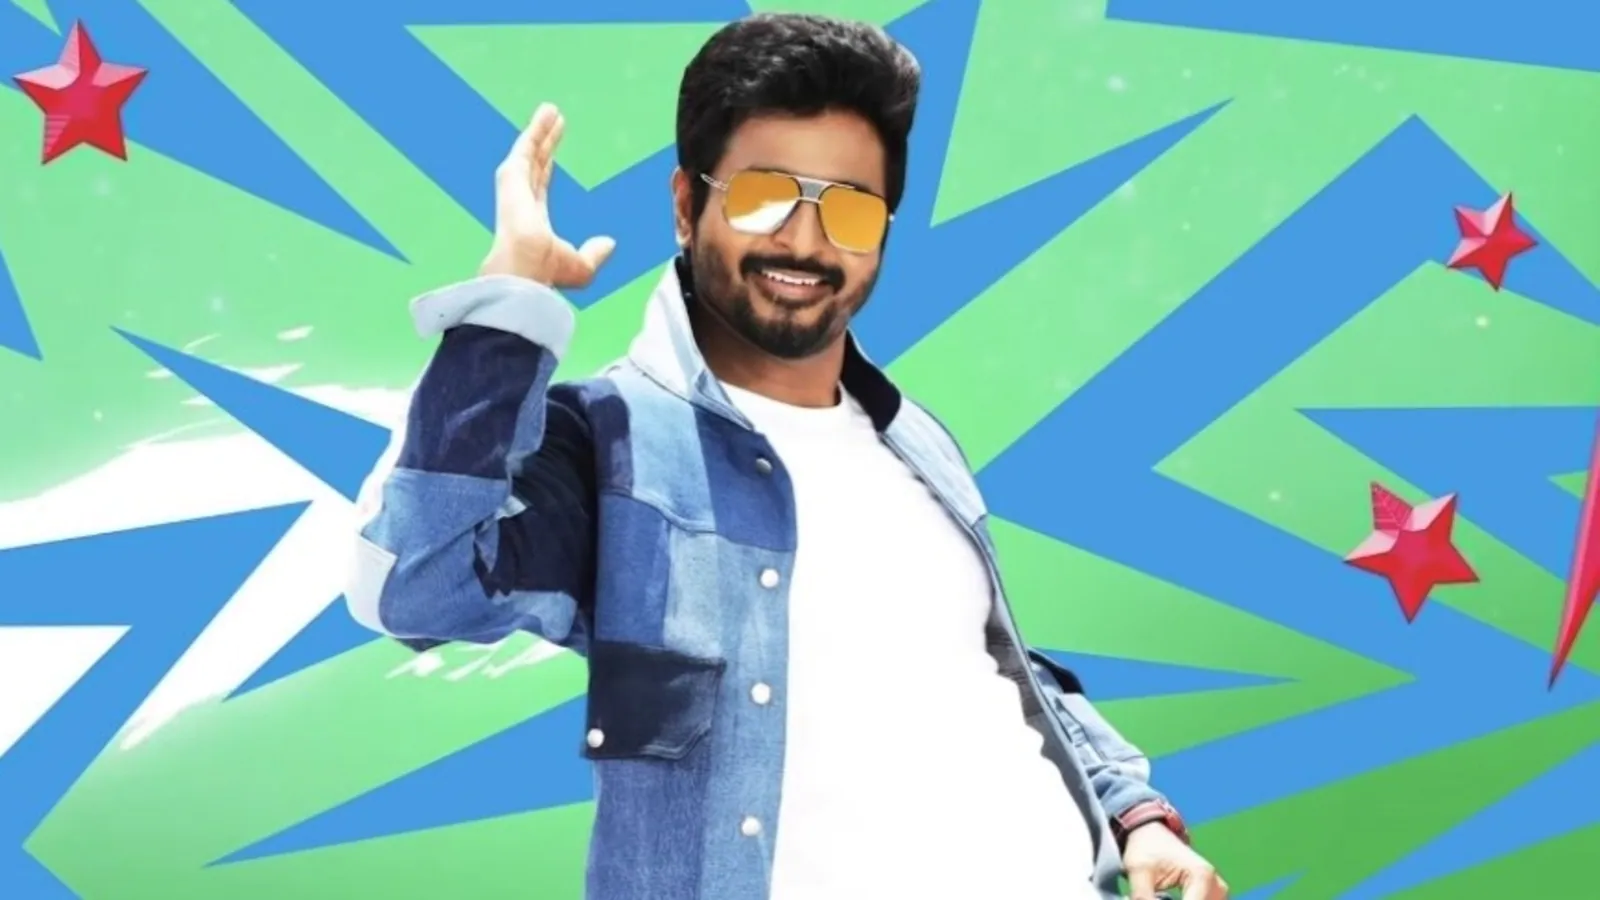 Don review: Sivakarthikeyan’s film is a predictable but likeable coming-of-age drama held together by good performances